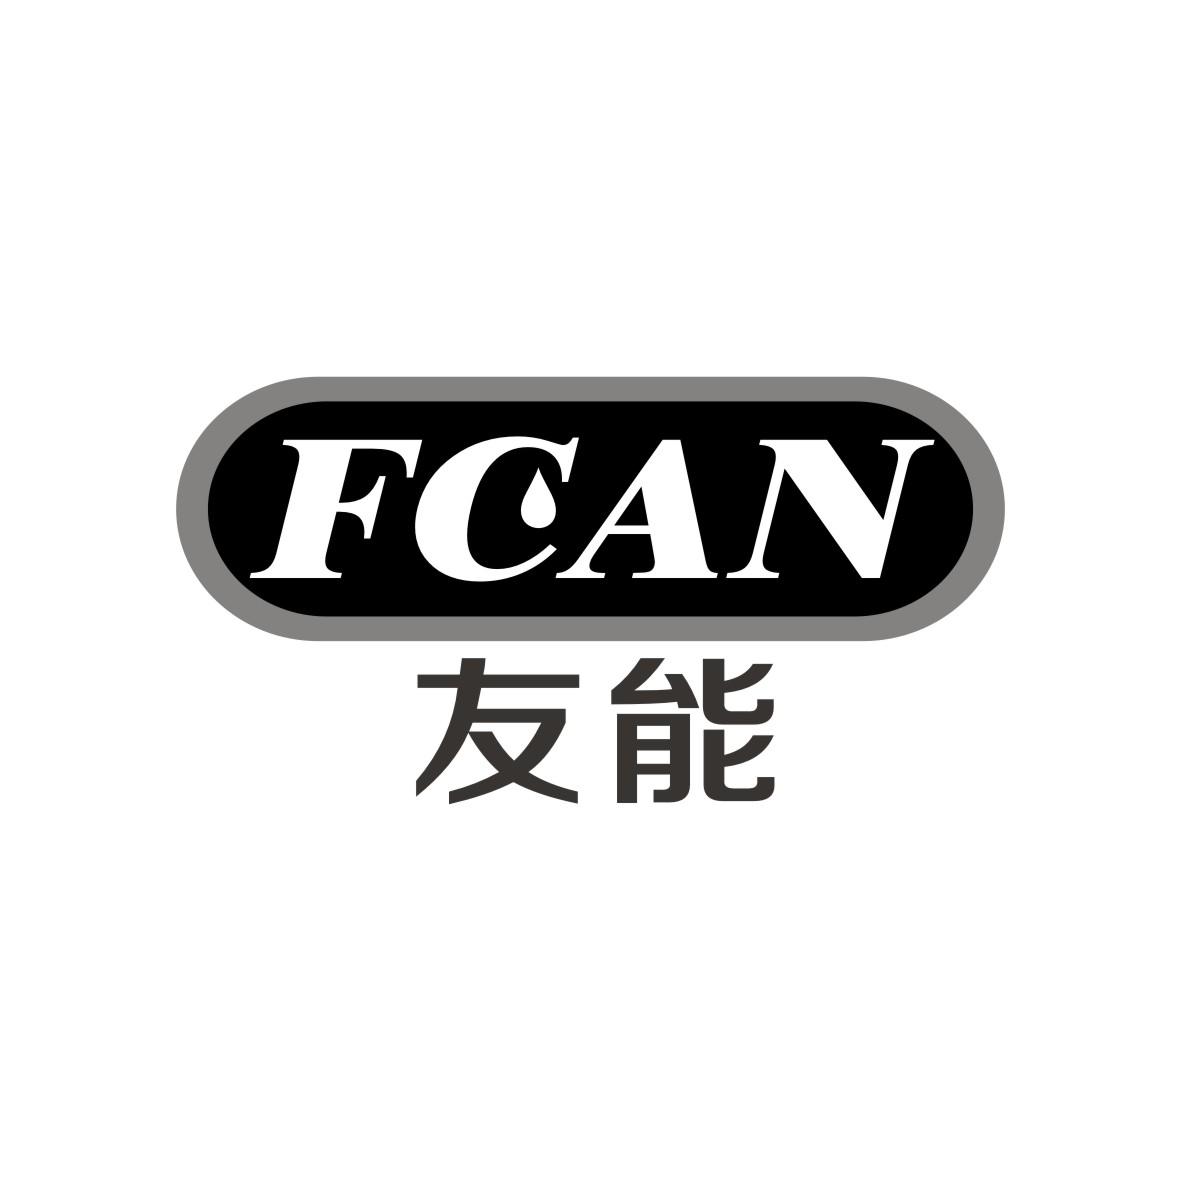  FCAN